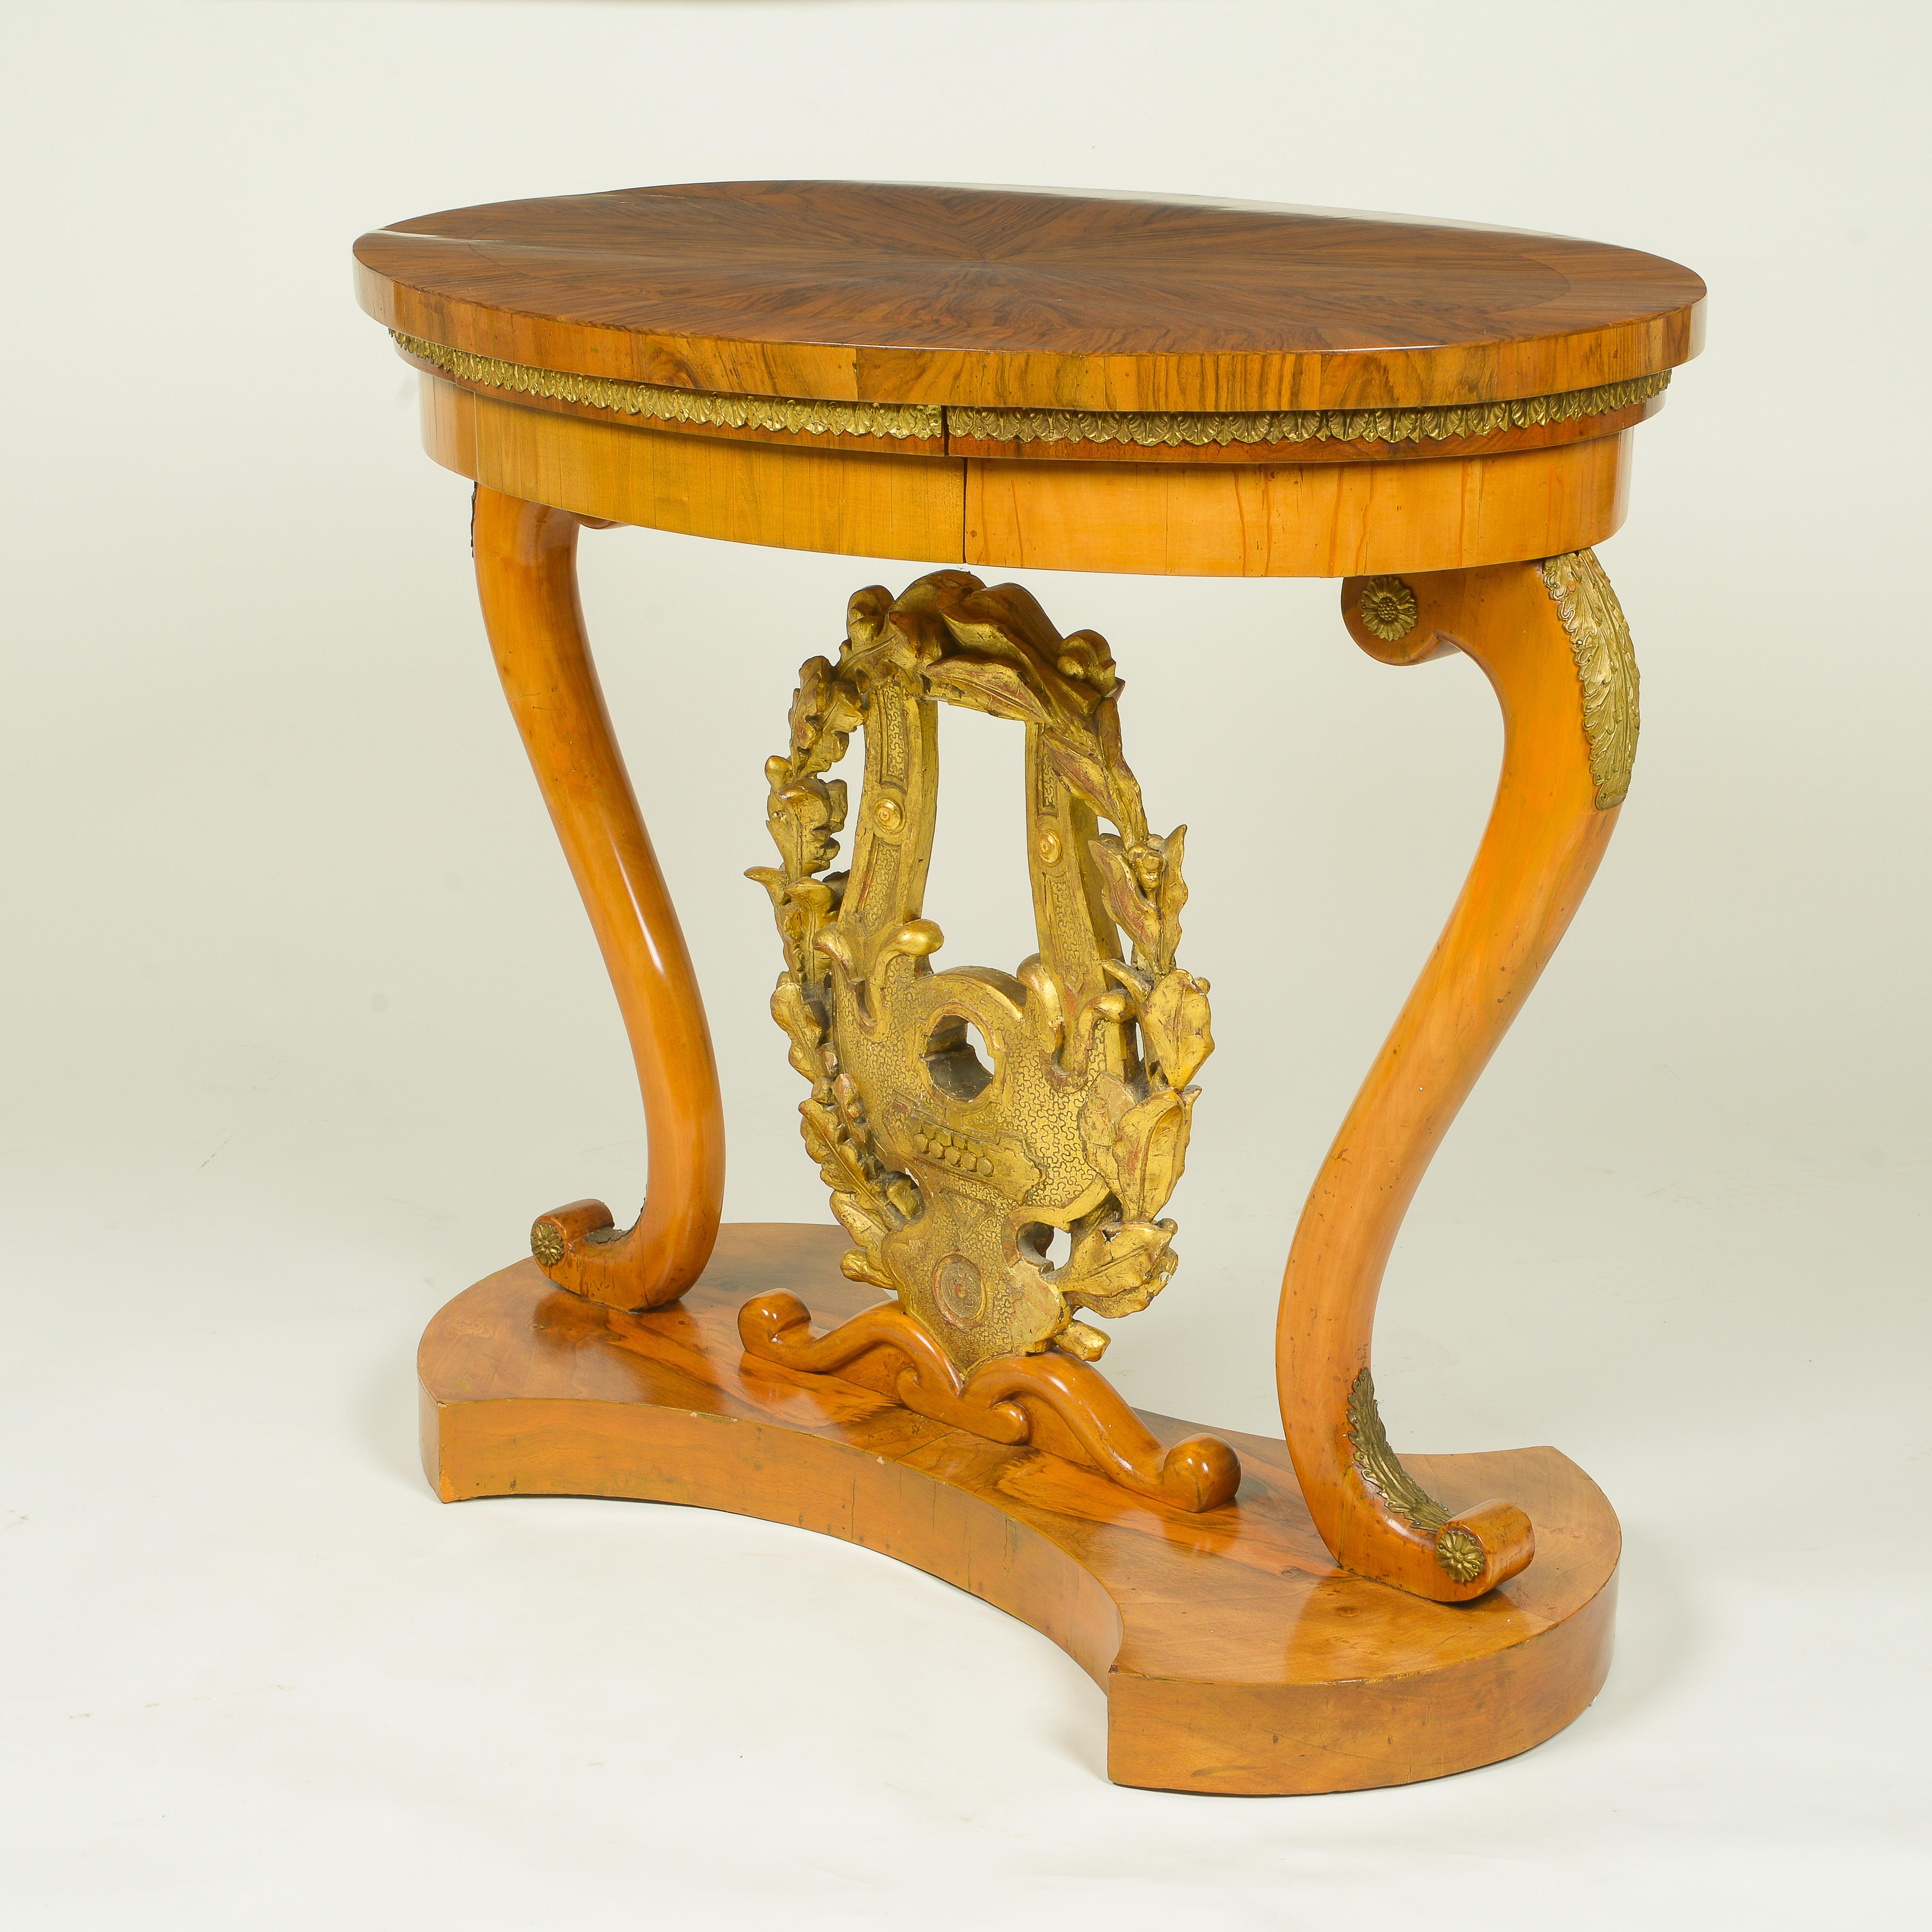 The oval top veneered in a radiating pattern with highly figured walnut, with stiff-leaf gilt-metal banding, over a frieze drawer; raised on gilt-metal mounted fruitwood volutes and a carved giltwood lyre encircled by a laurel wreath, both emblems